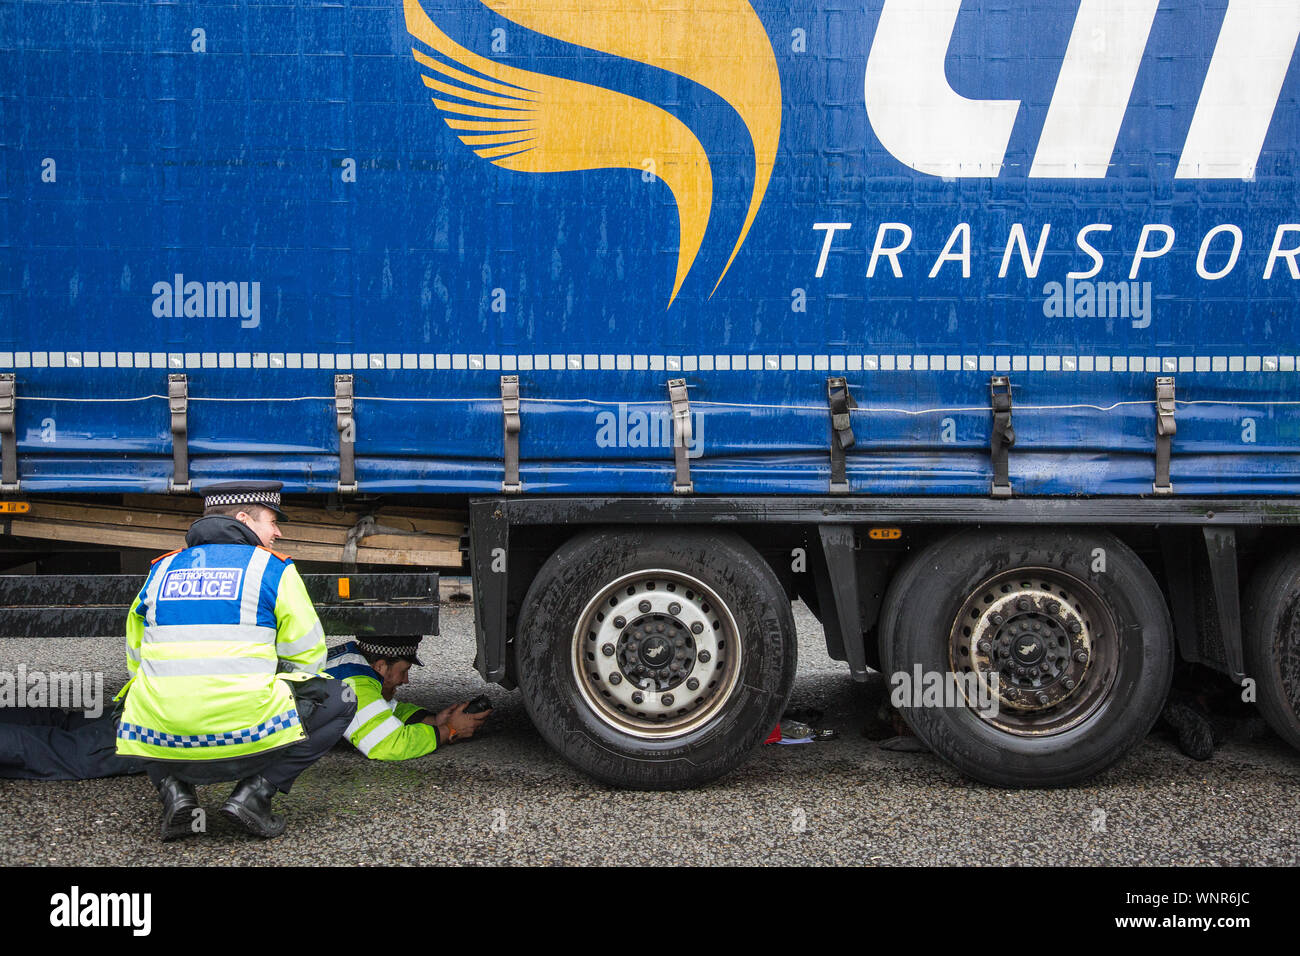 London, UK. 6 September, 2019. Metropolitan Police officers monitor an activist locked beneath a truck making a delivery to ExCel London for DSEI, the world’s largest arms fair. The road remained blocked for several hours. The fifth day of protests against the arms fair was themed as Stop The Arms Fair: Stop Climate Change in order to highlight links between the fossil fuel and arms industries. Credit: Mark Kerrison/Alamy Live News Stock Photo